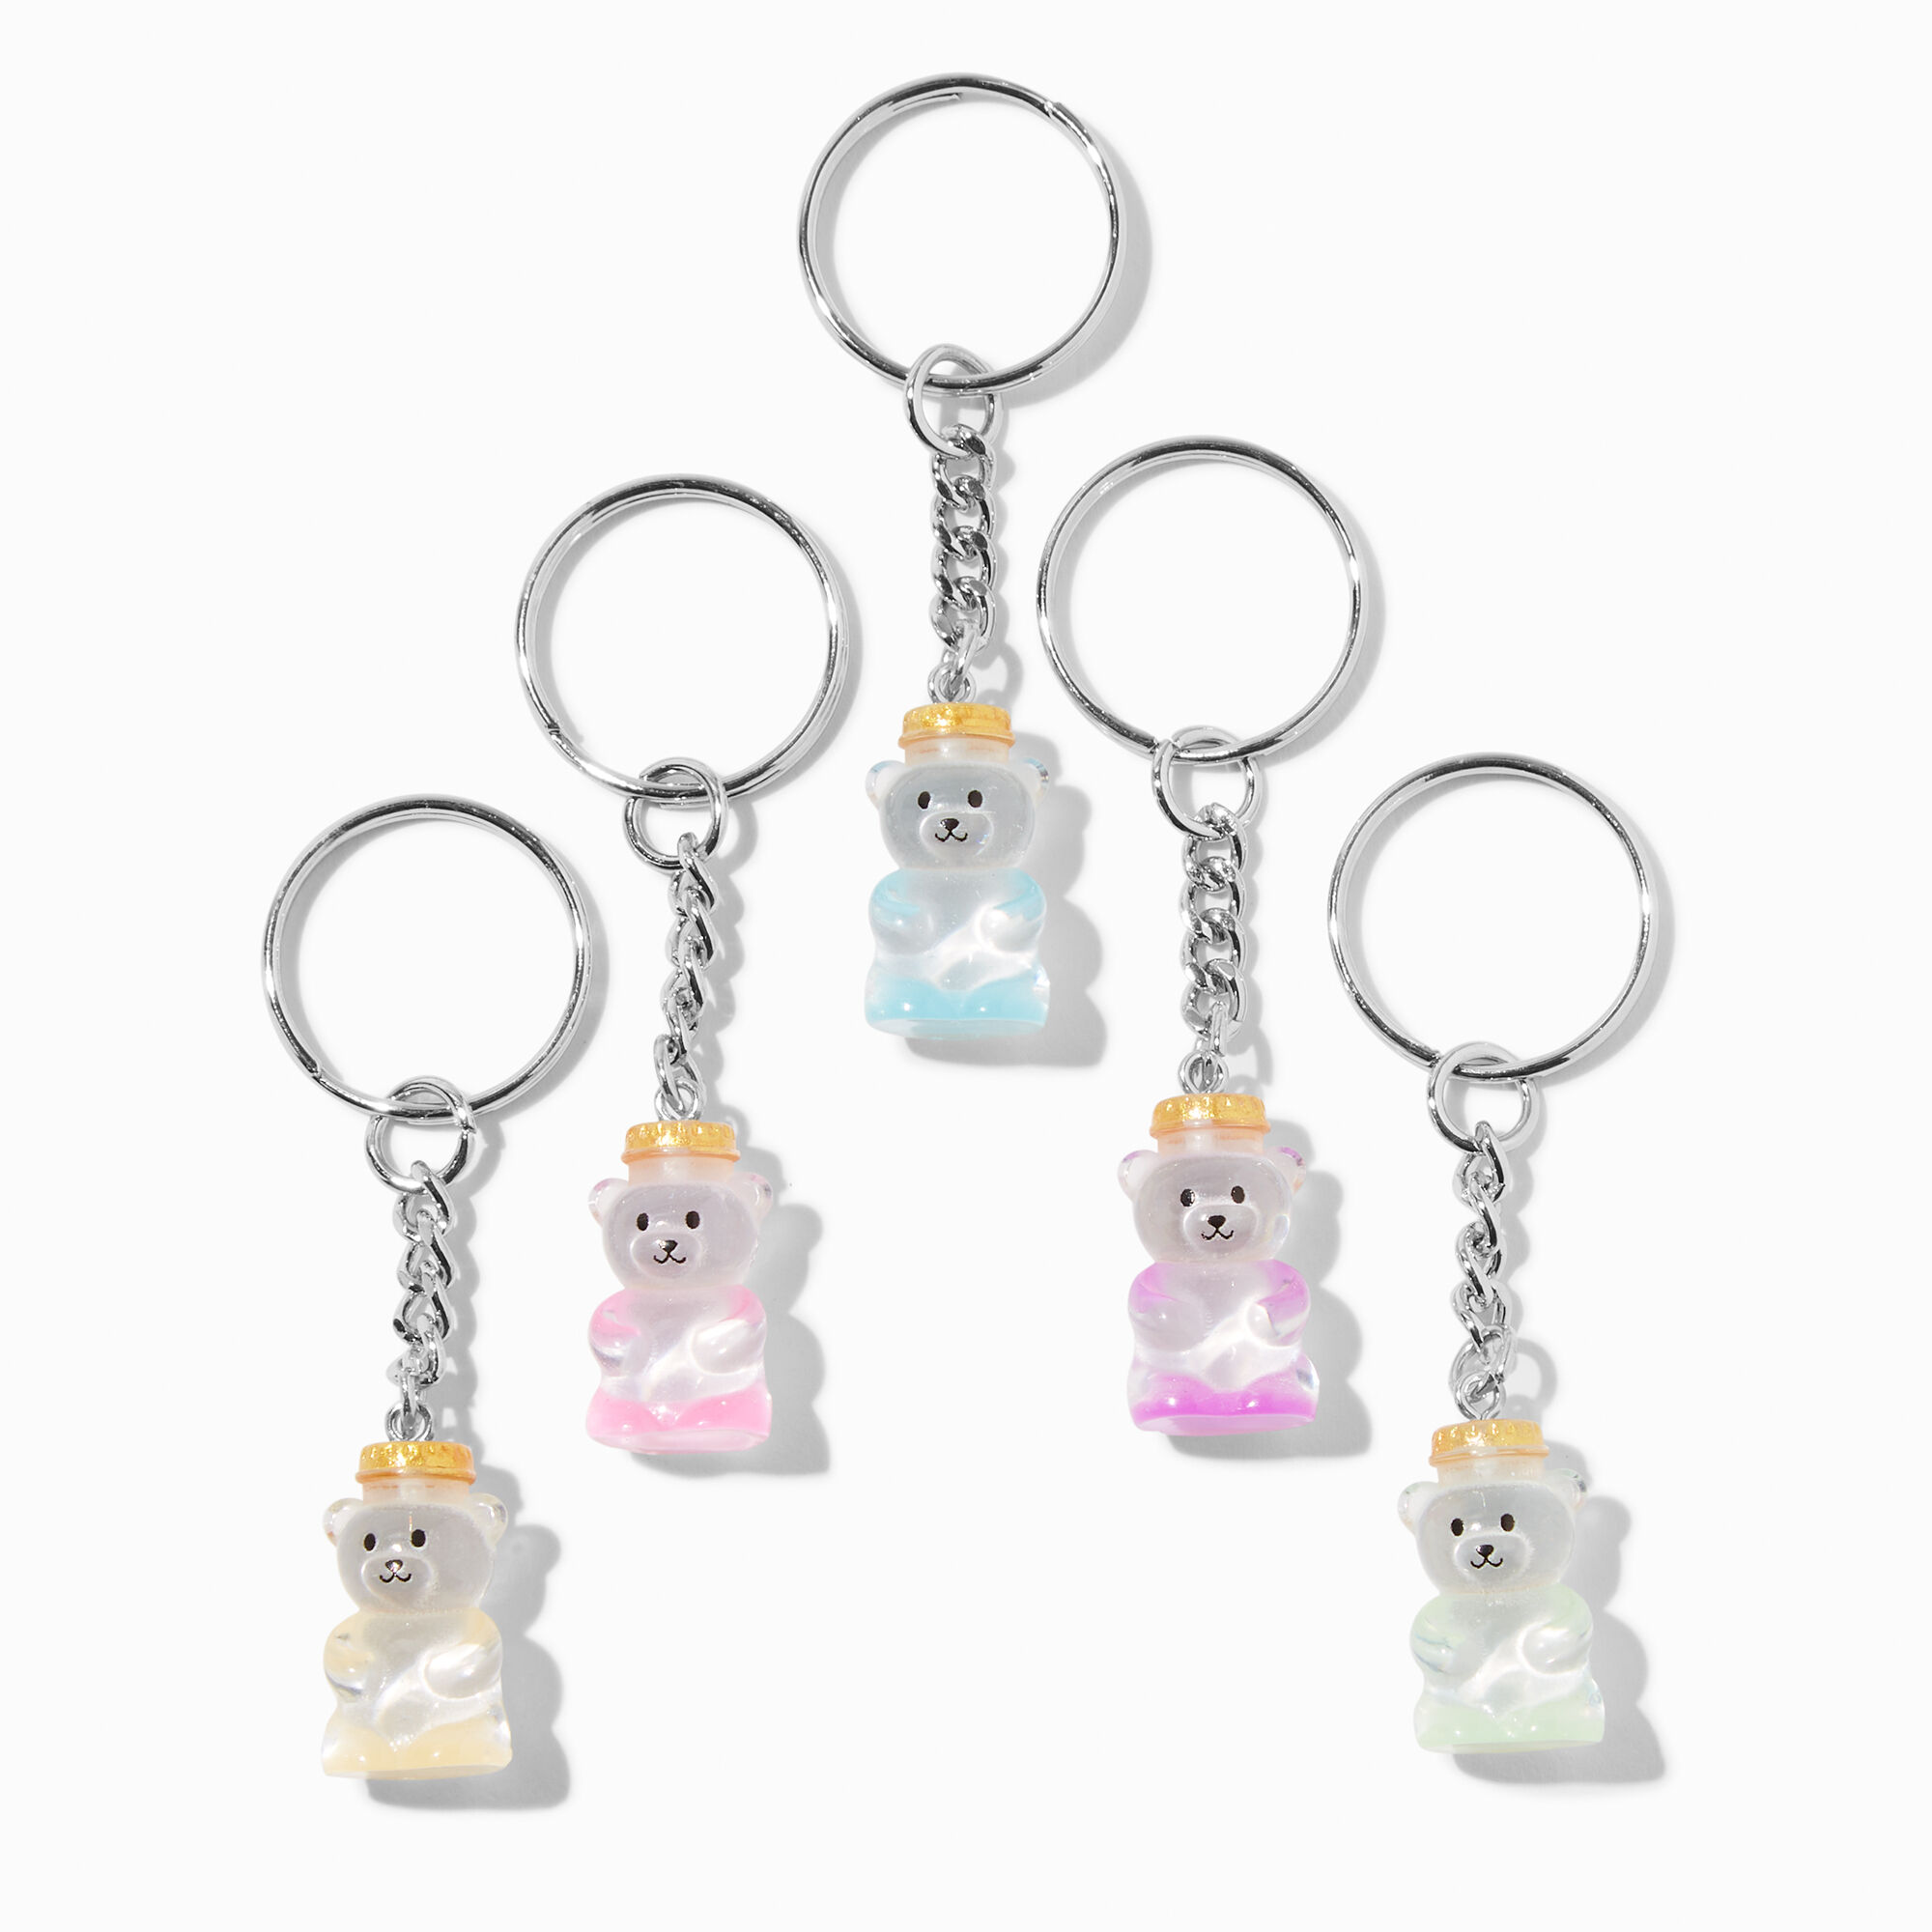 View Claires Best Friends Honey Bears Glow In The Dark Keyrings 5 Pack Silver information